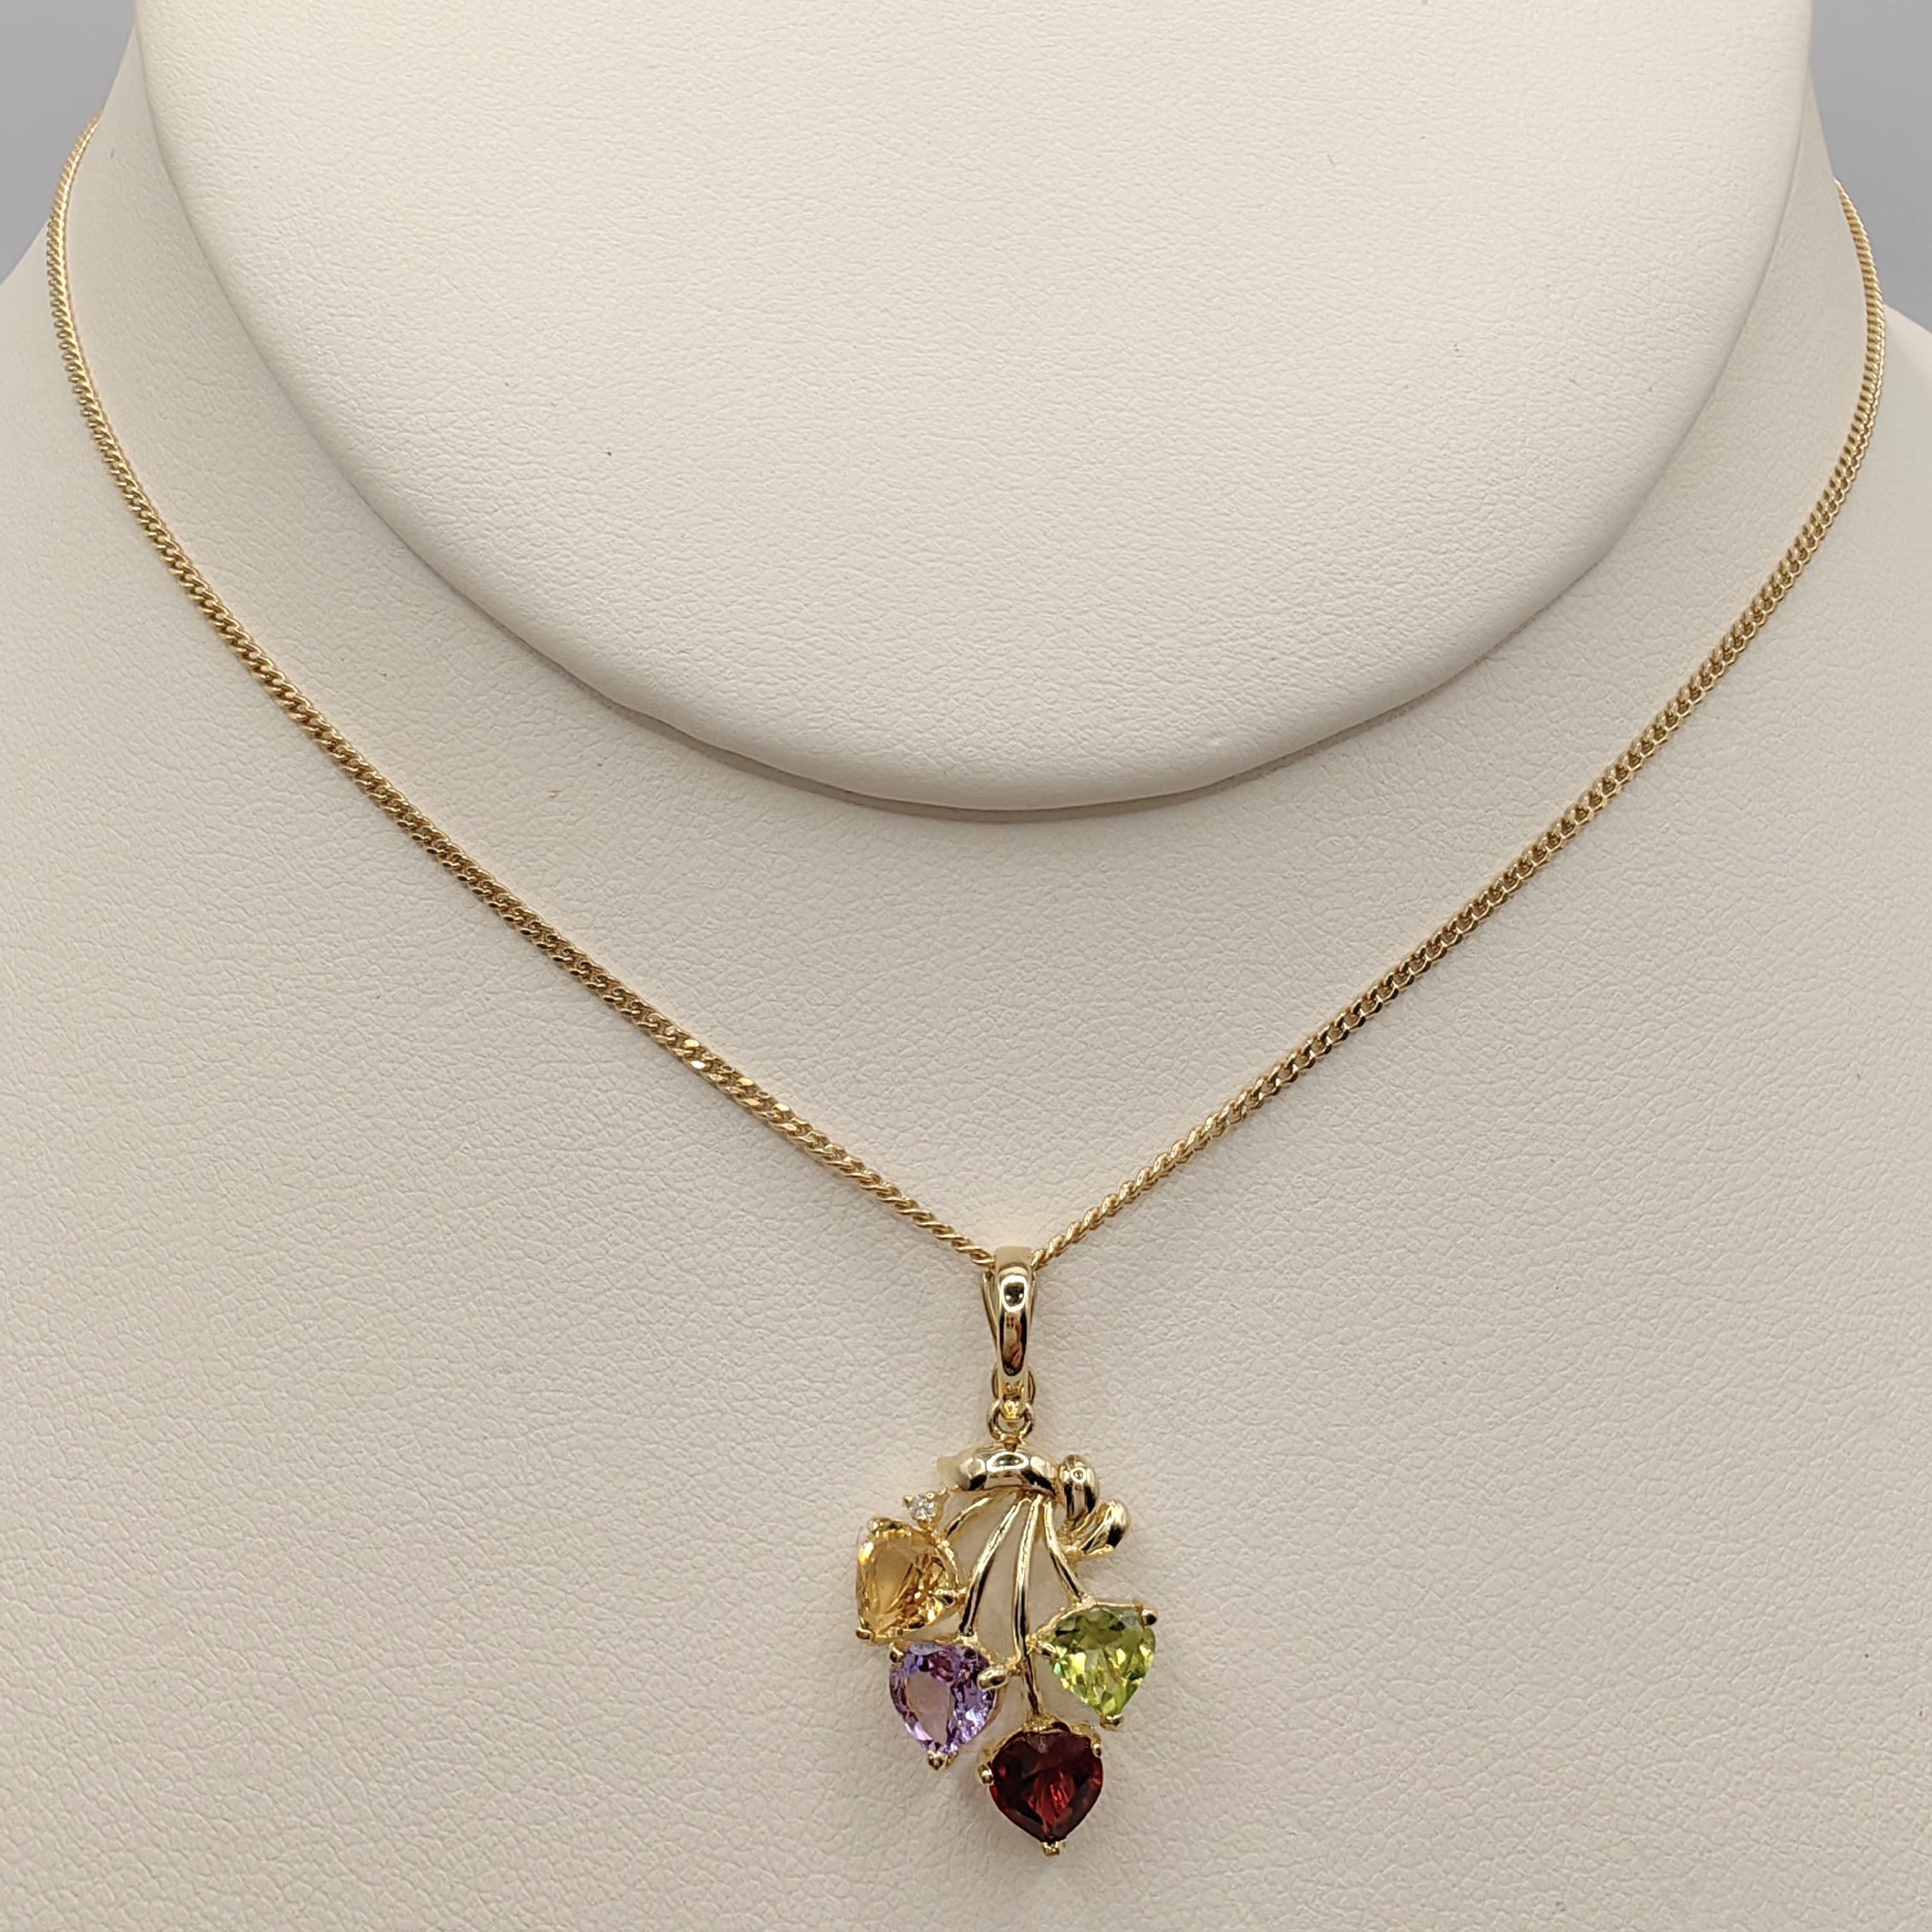 Introducing our delightful 80's Heart Shaped Amethyst, Citrine, Garnet, Peridot 14K Gold Necklace Pendant. This dainty and colorful pendant showcases a charming blend of heart-cut amethyst, citrine, garnet, and peridot gemstones, each measuring